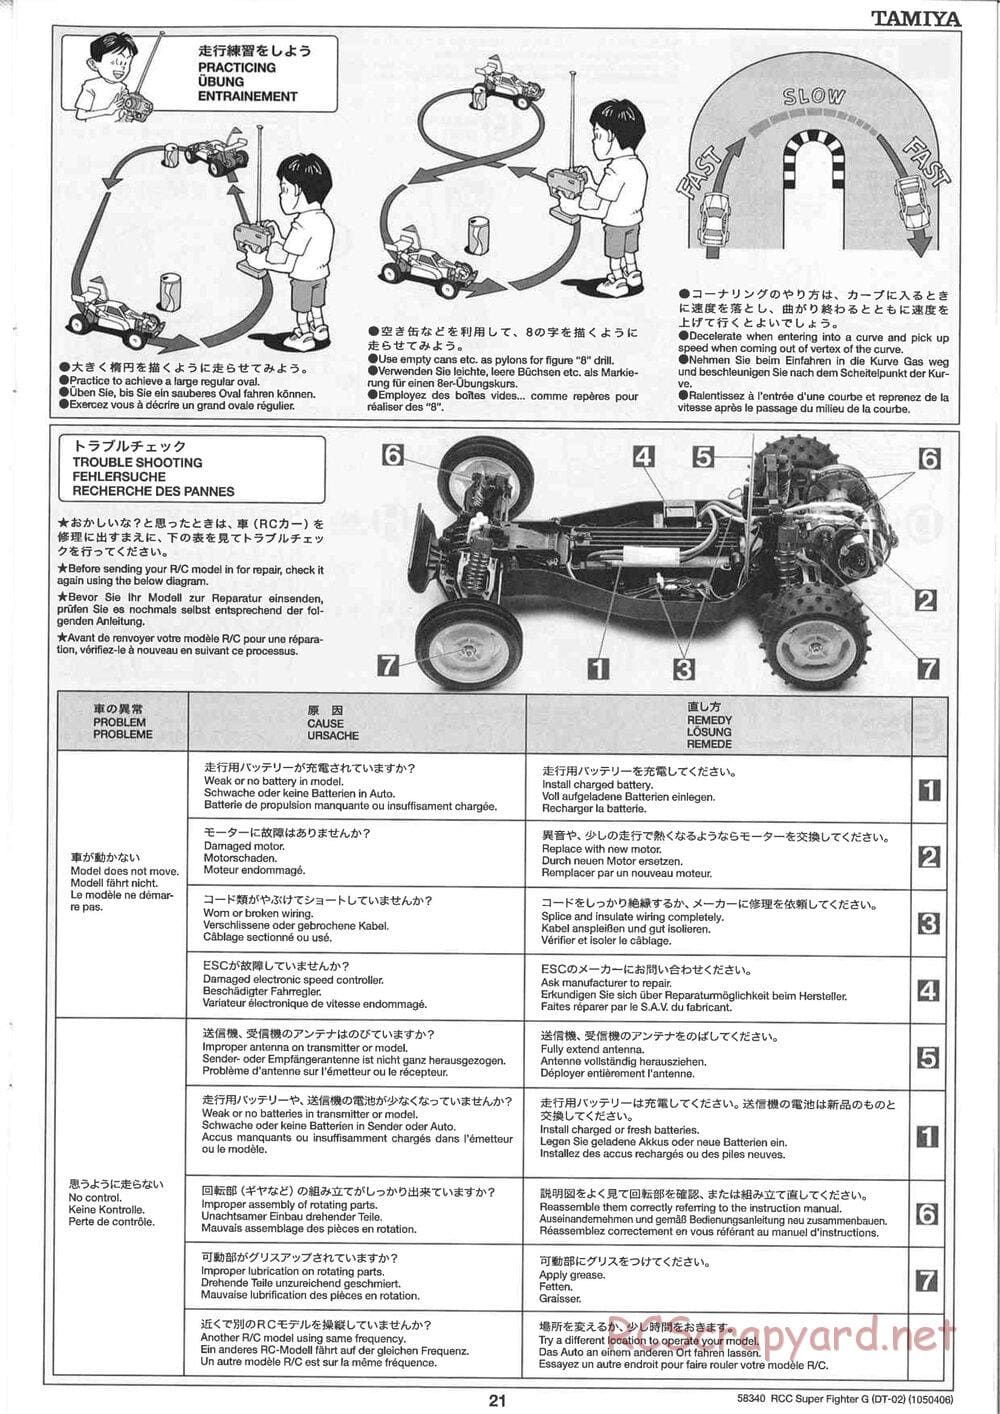 Tamiya - Super Fighter G Chassis - Manual - Page 21